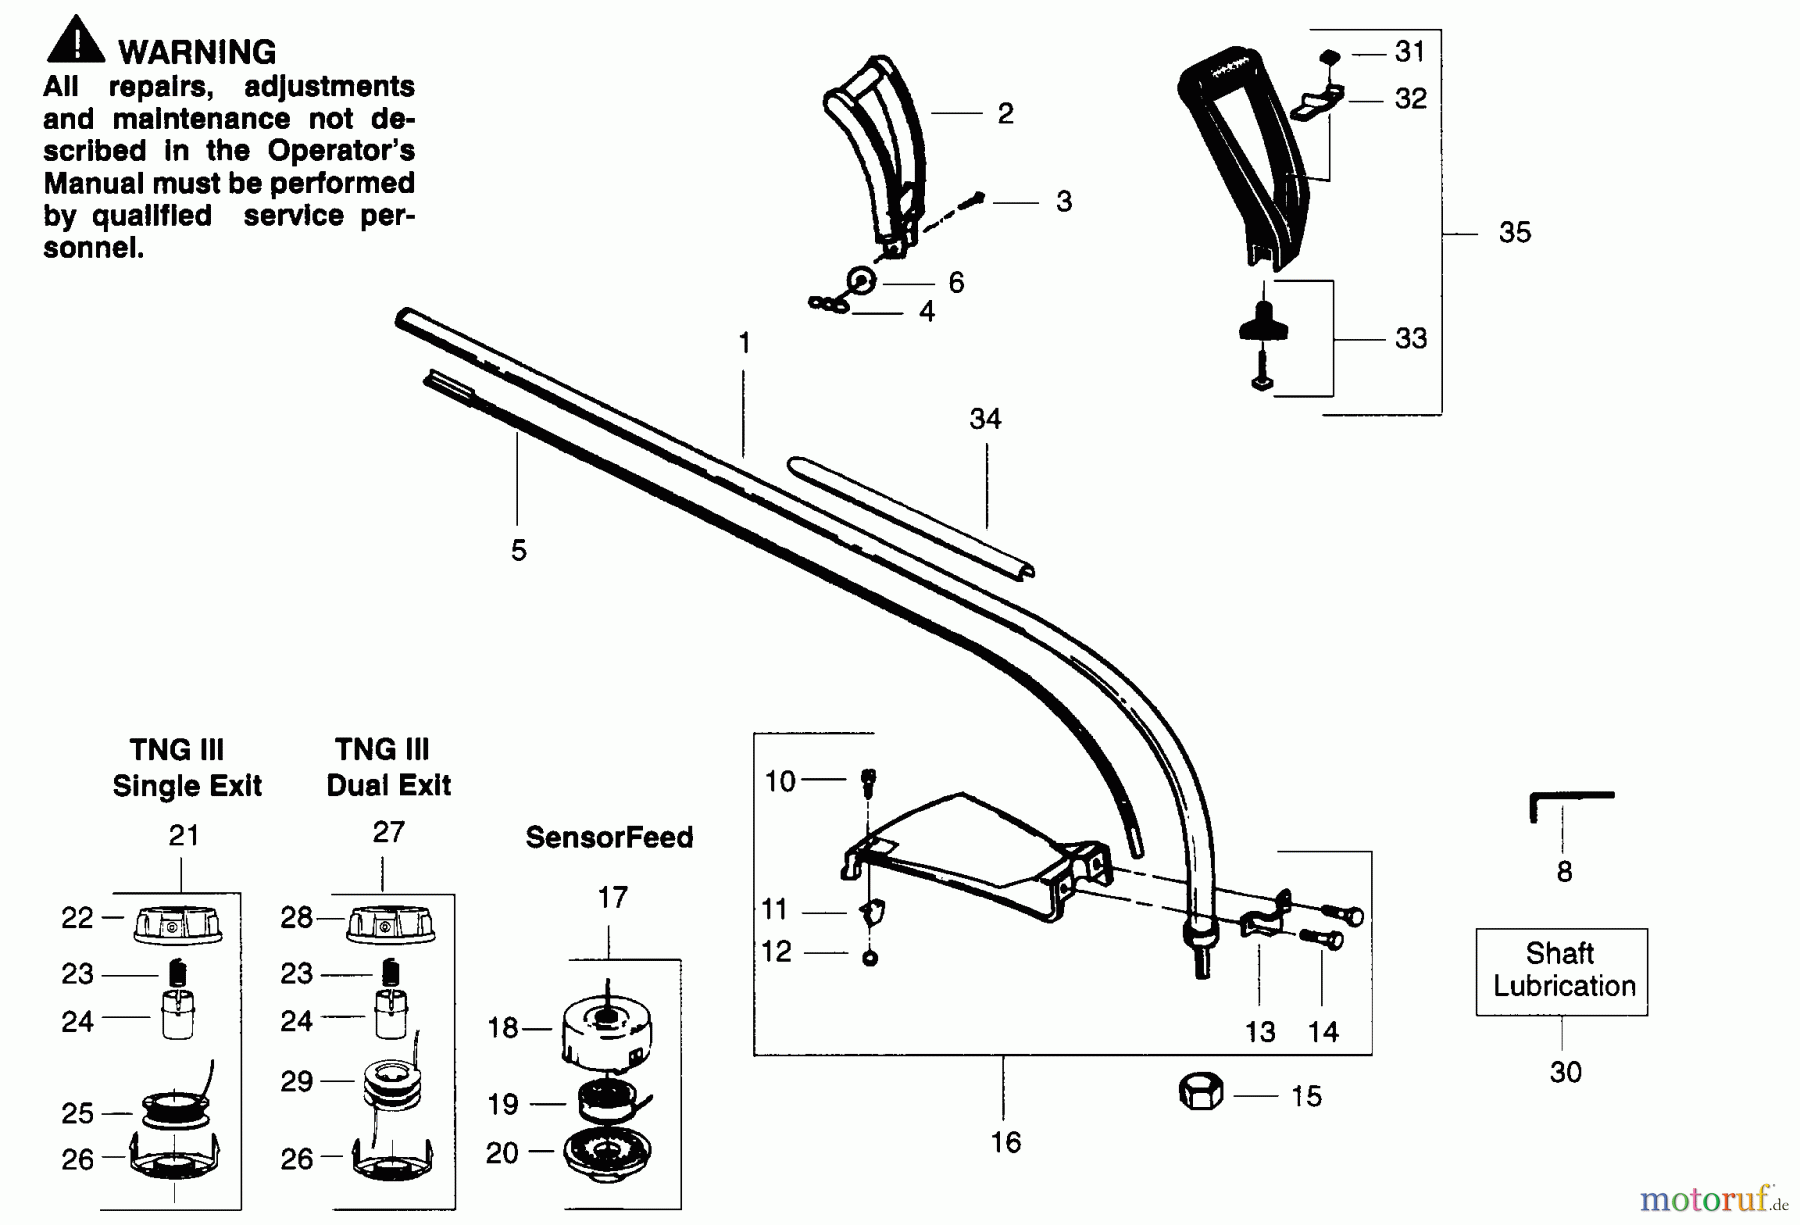  Poulan / Weed Eater Motorsensen, Trimmer GTI16 SUPER - Weed Eater String Trimmer DRIVE SHAFT & CUTTING HEAD